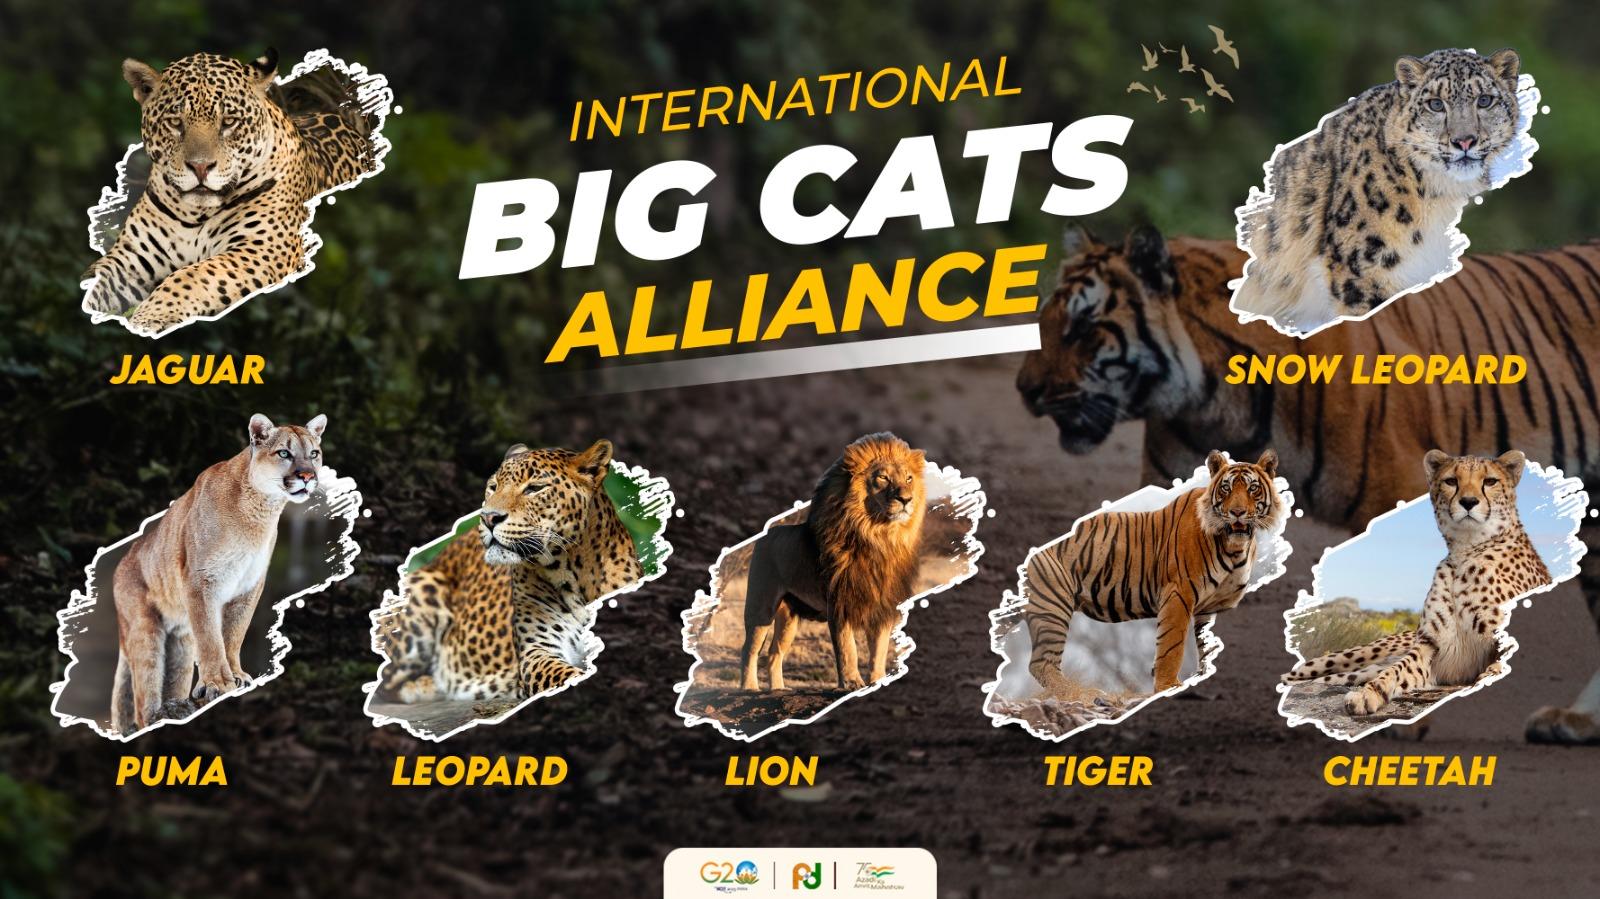 India launched international Big Cat Alliance for conserving 7 big cats_50.1